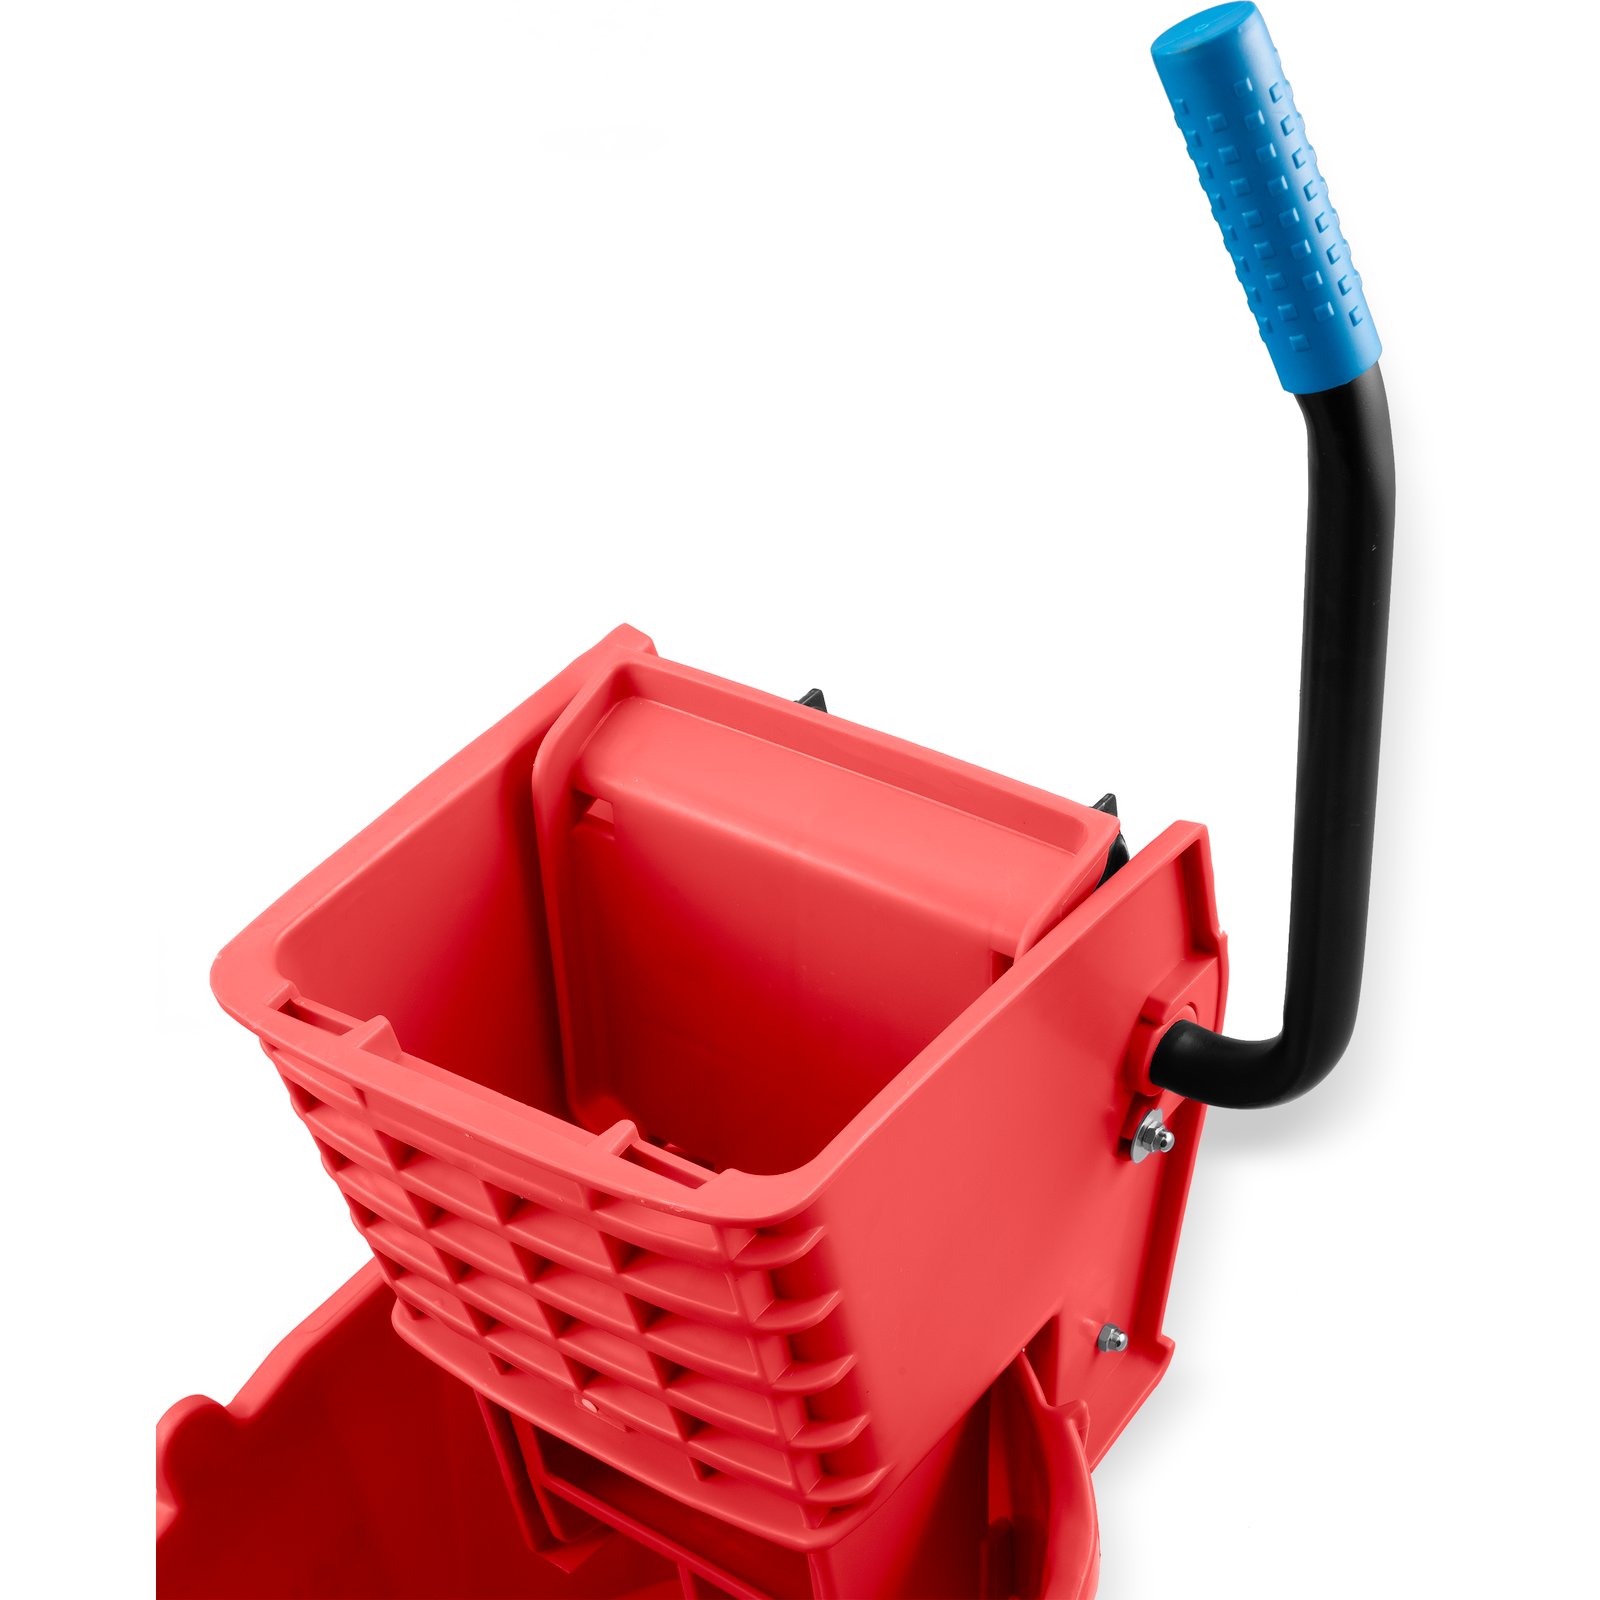 919229-6 Rubbermaid Red Polypropylene Mop Bucket and Wringer, 8-3/4 gal.